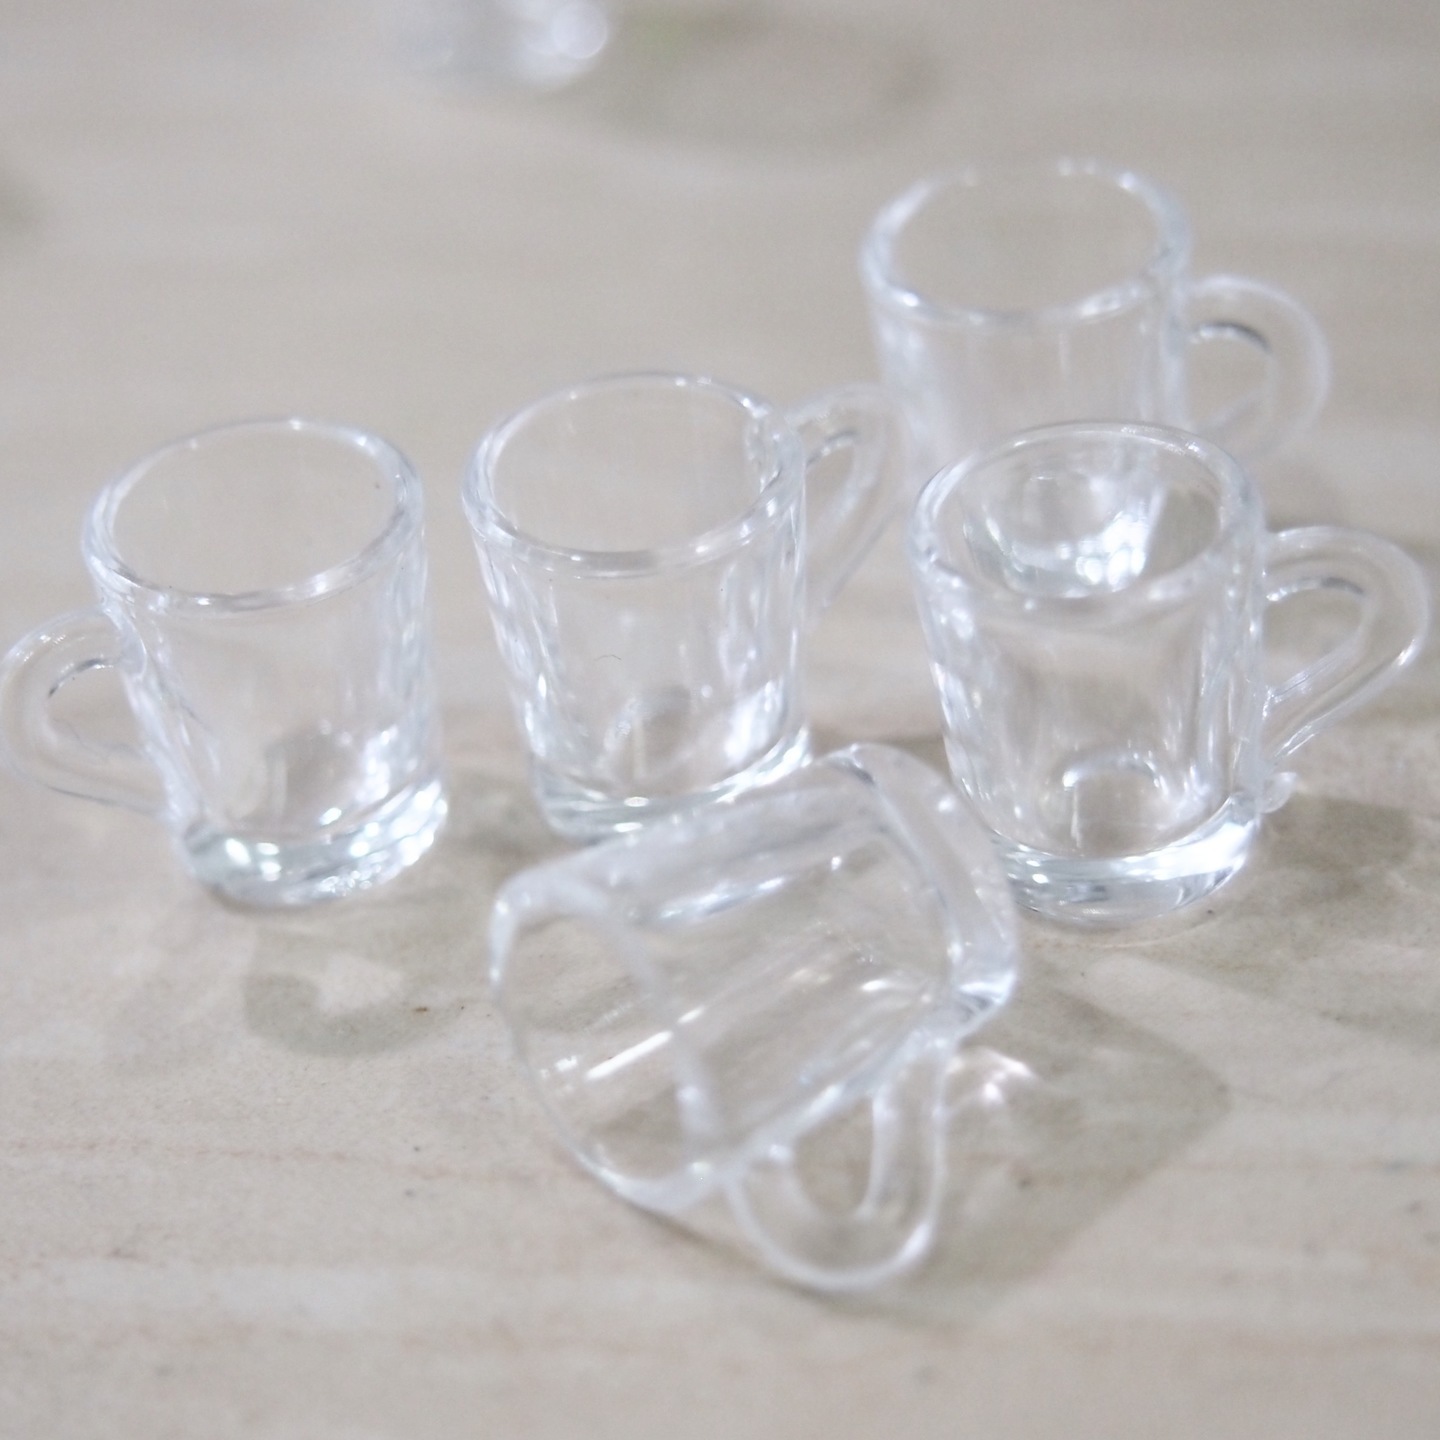 Miniatures - 10 Plastic Coffee Tea Cup for Dollhouse Display